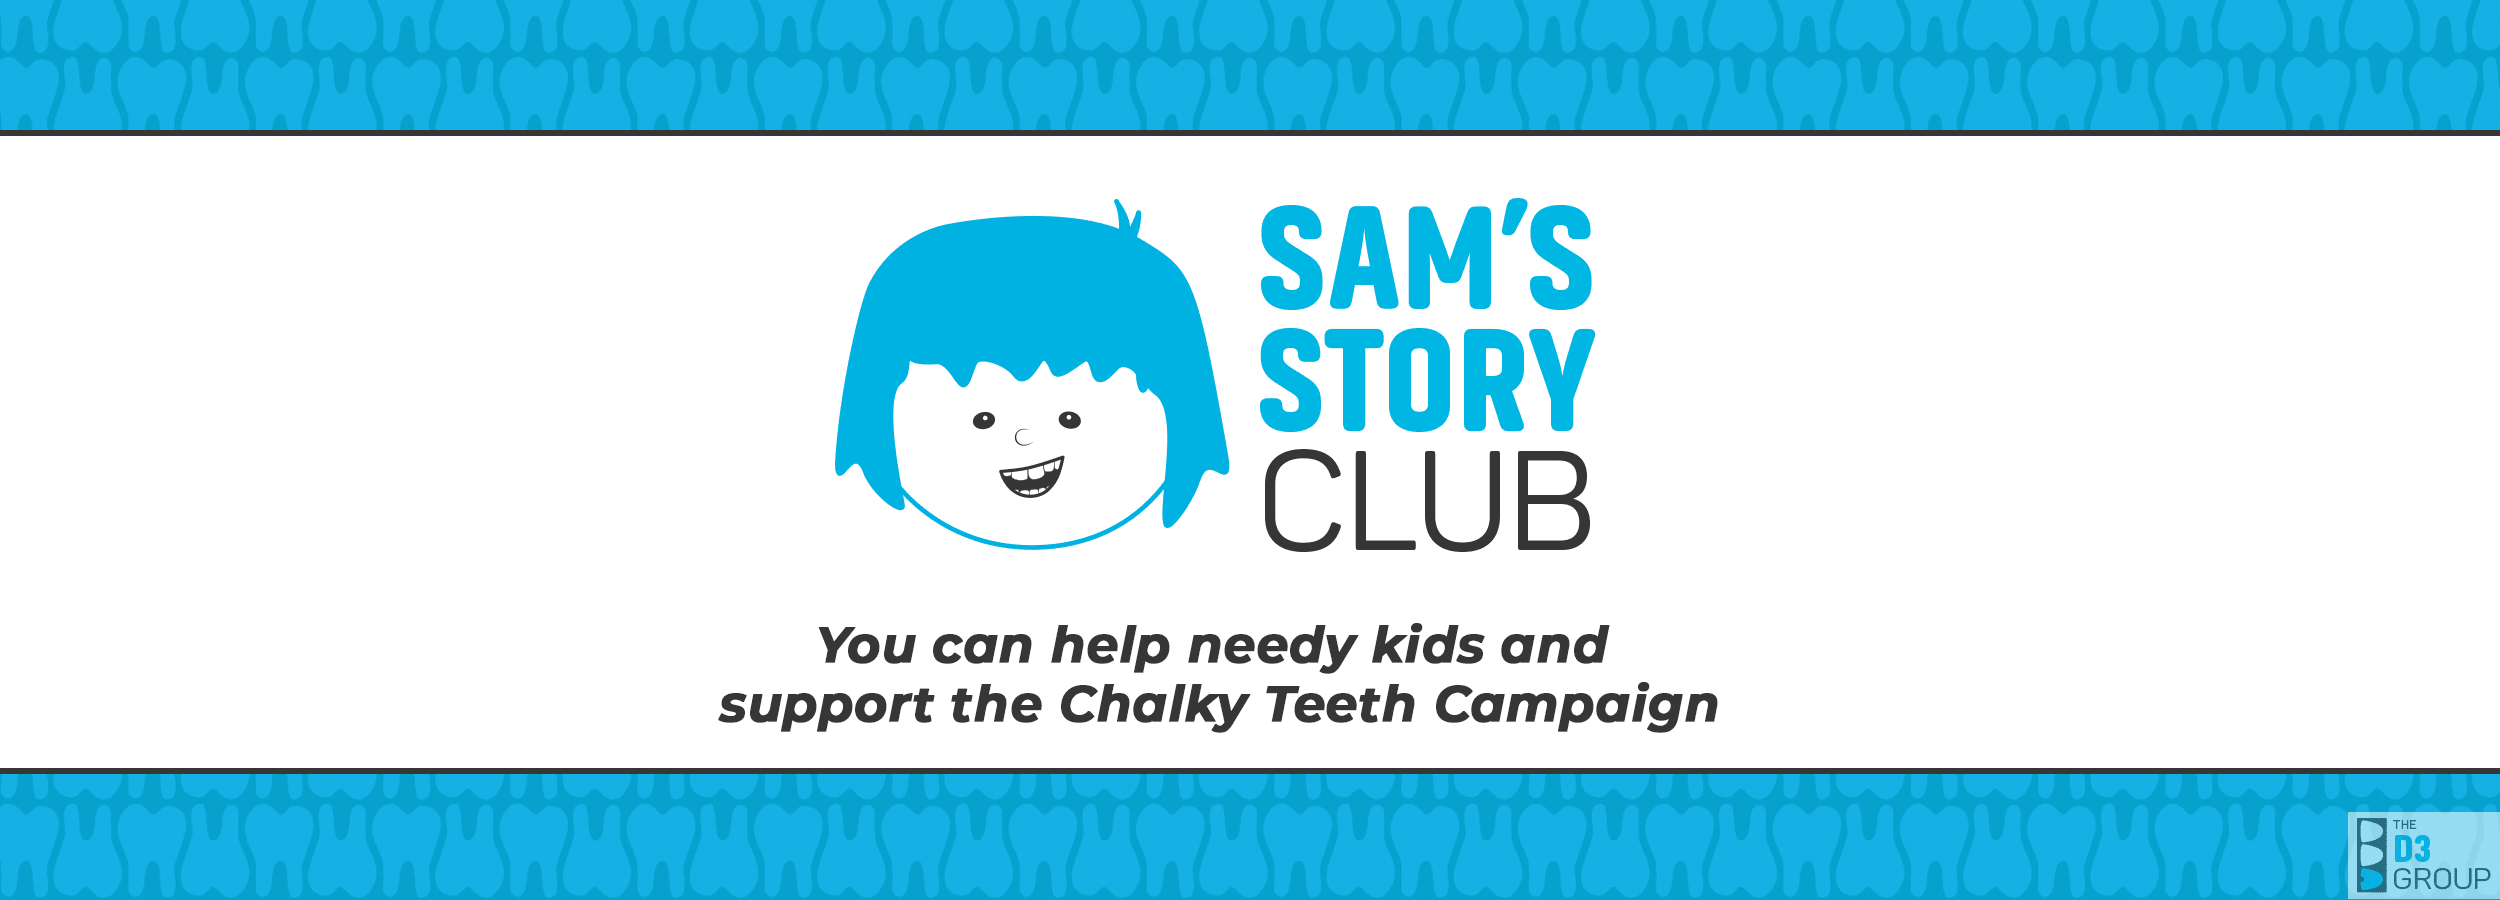 Sam's Story Club - A socially impactful way to help children, medico-dental research, and education worldwide - Main Banner Image